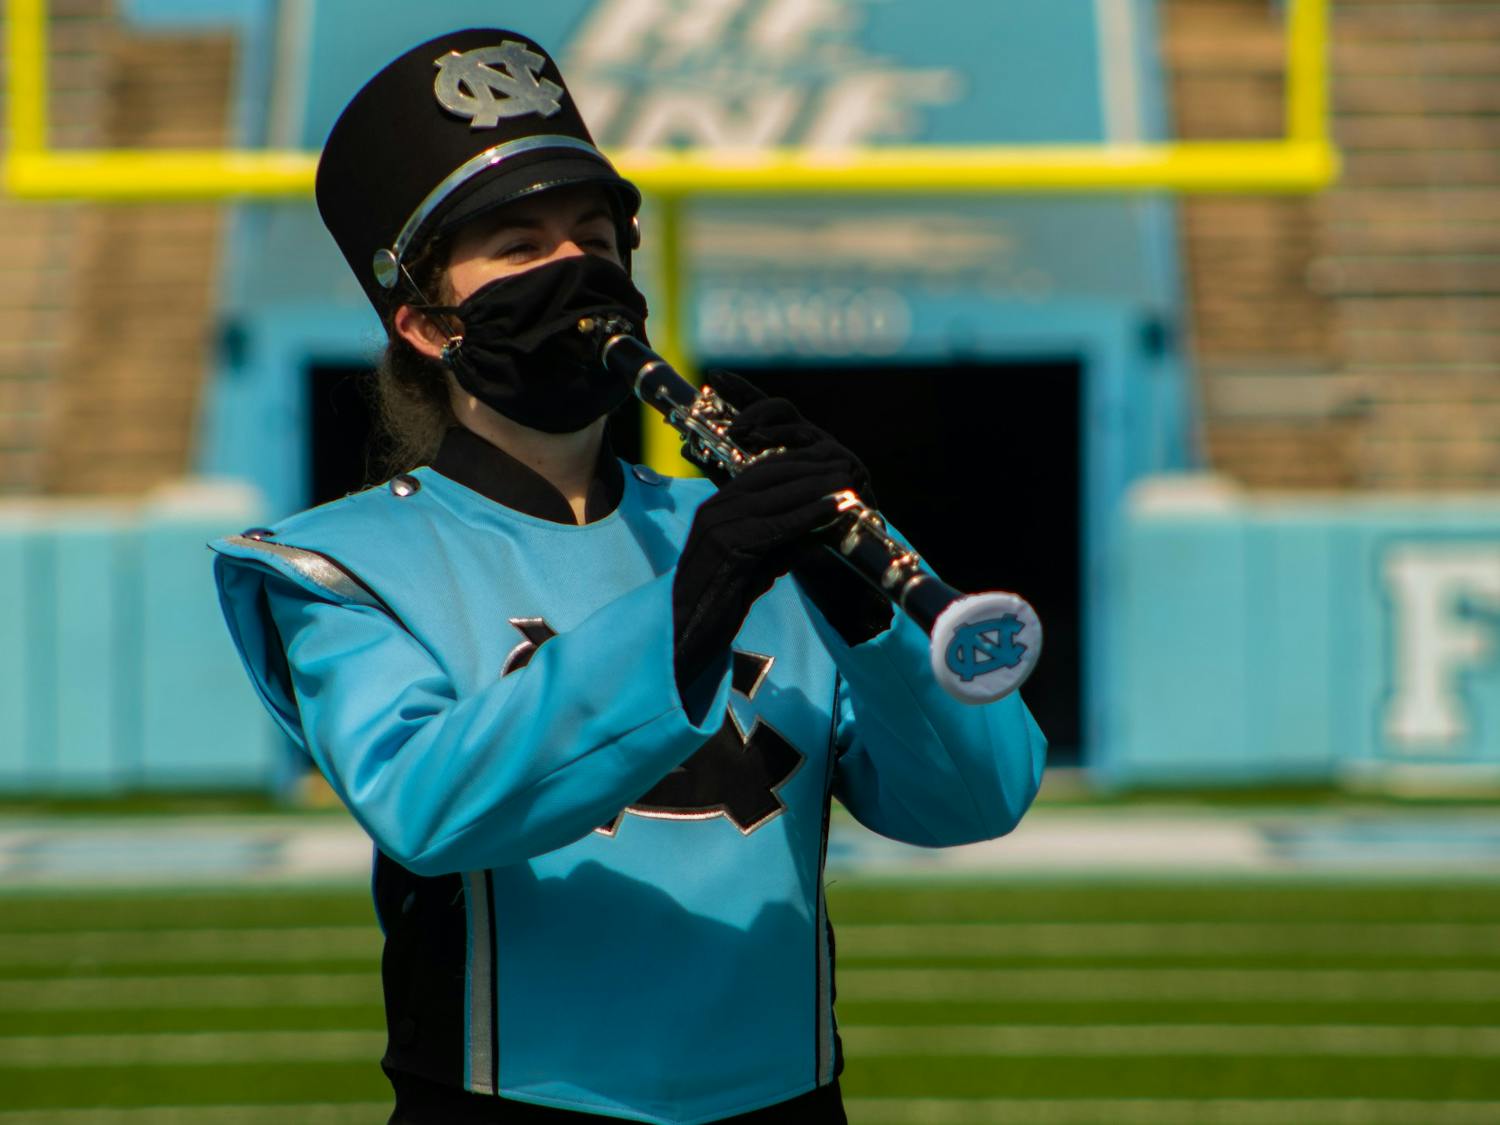 Sophomore Madi Marks plays a scale on her clarinet while demonstrating the new safety precautions the Marching Band must take to protect against COVID.